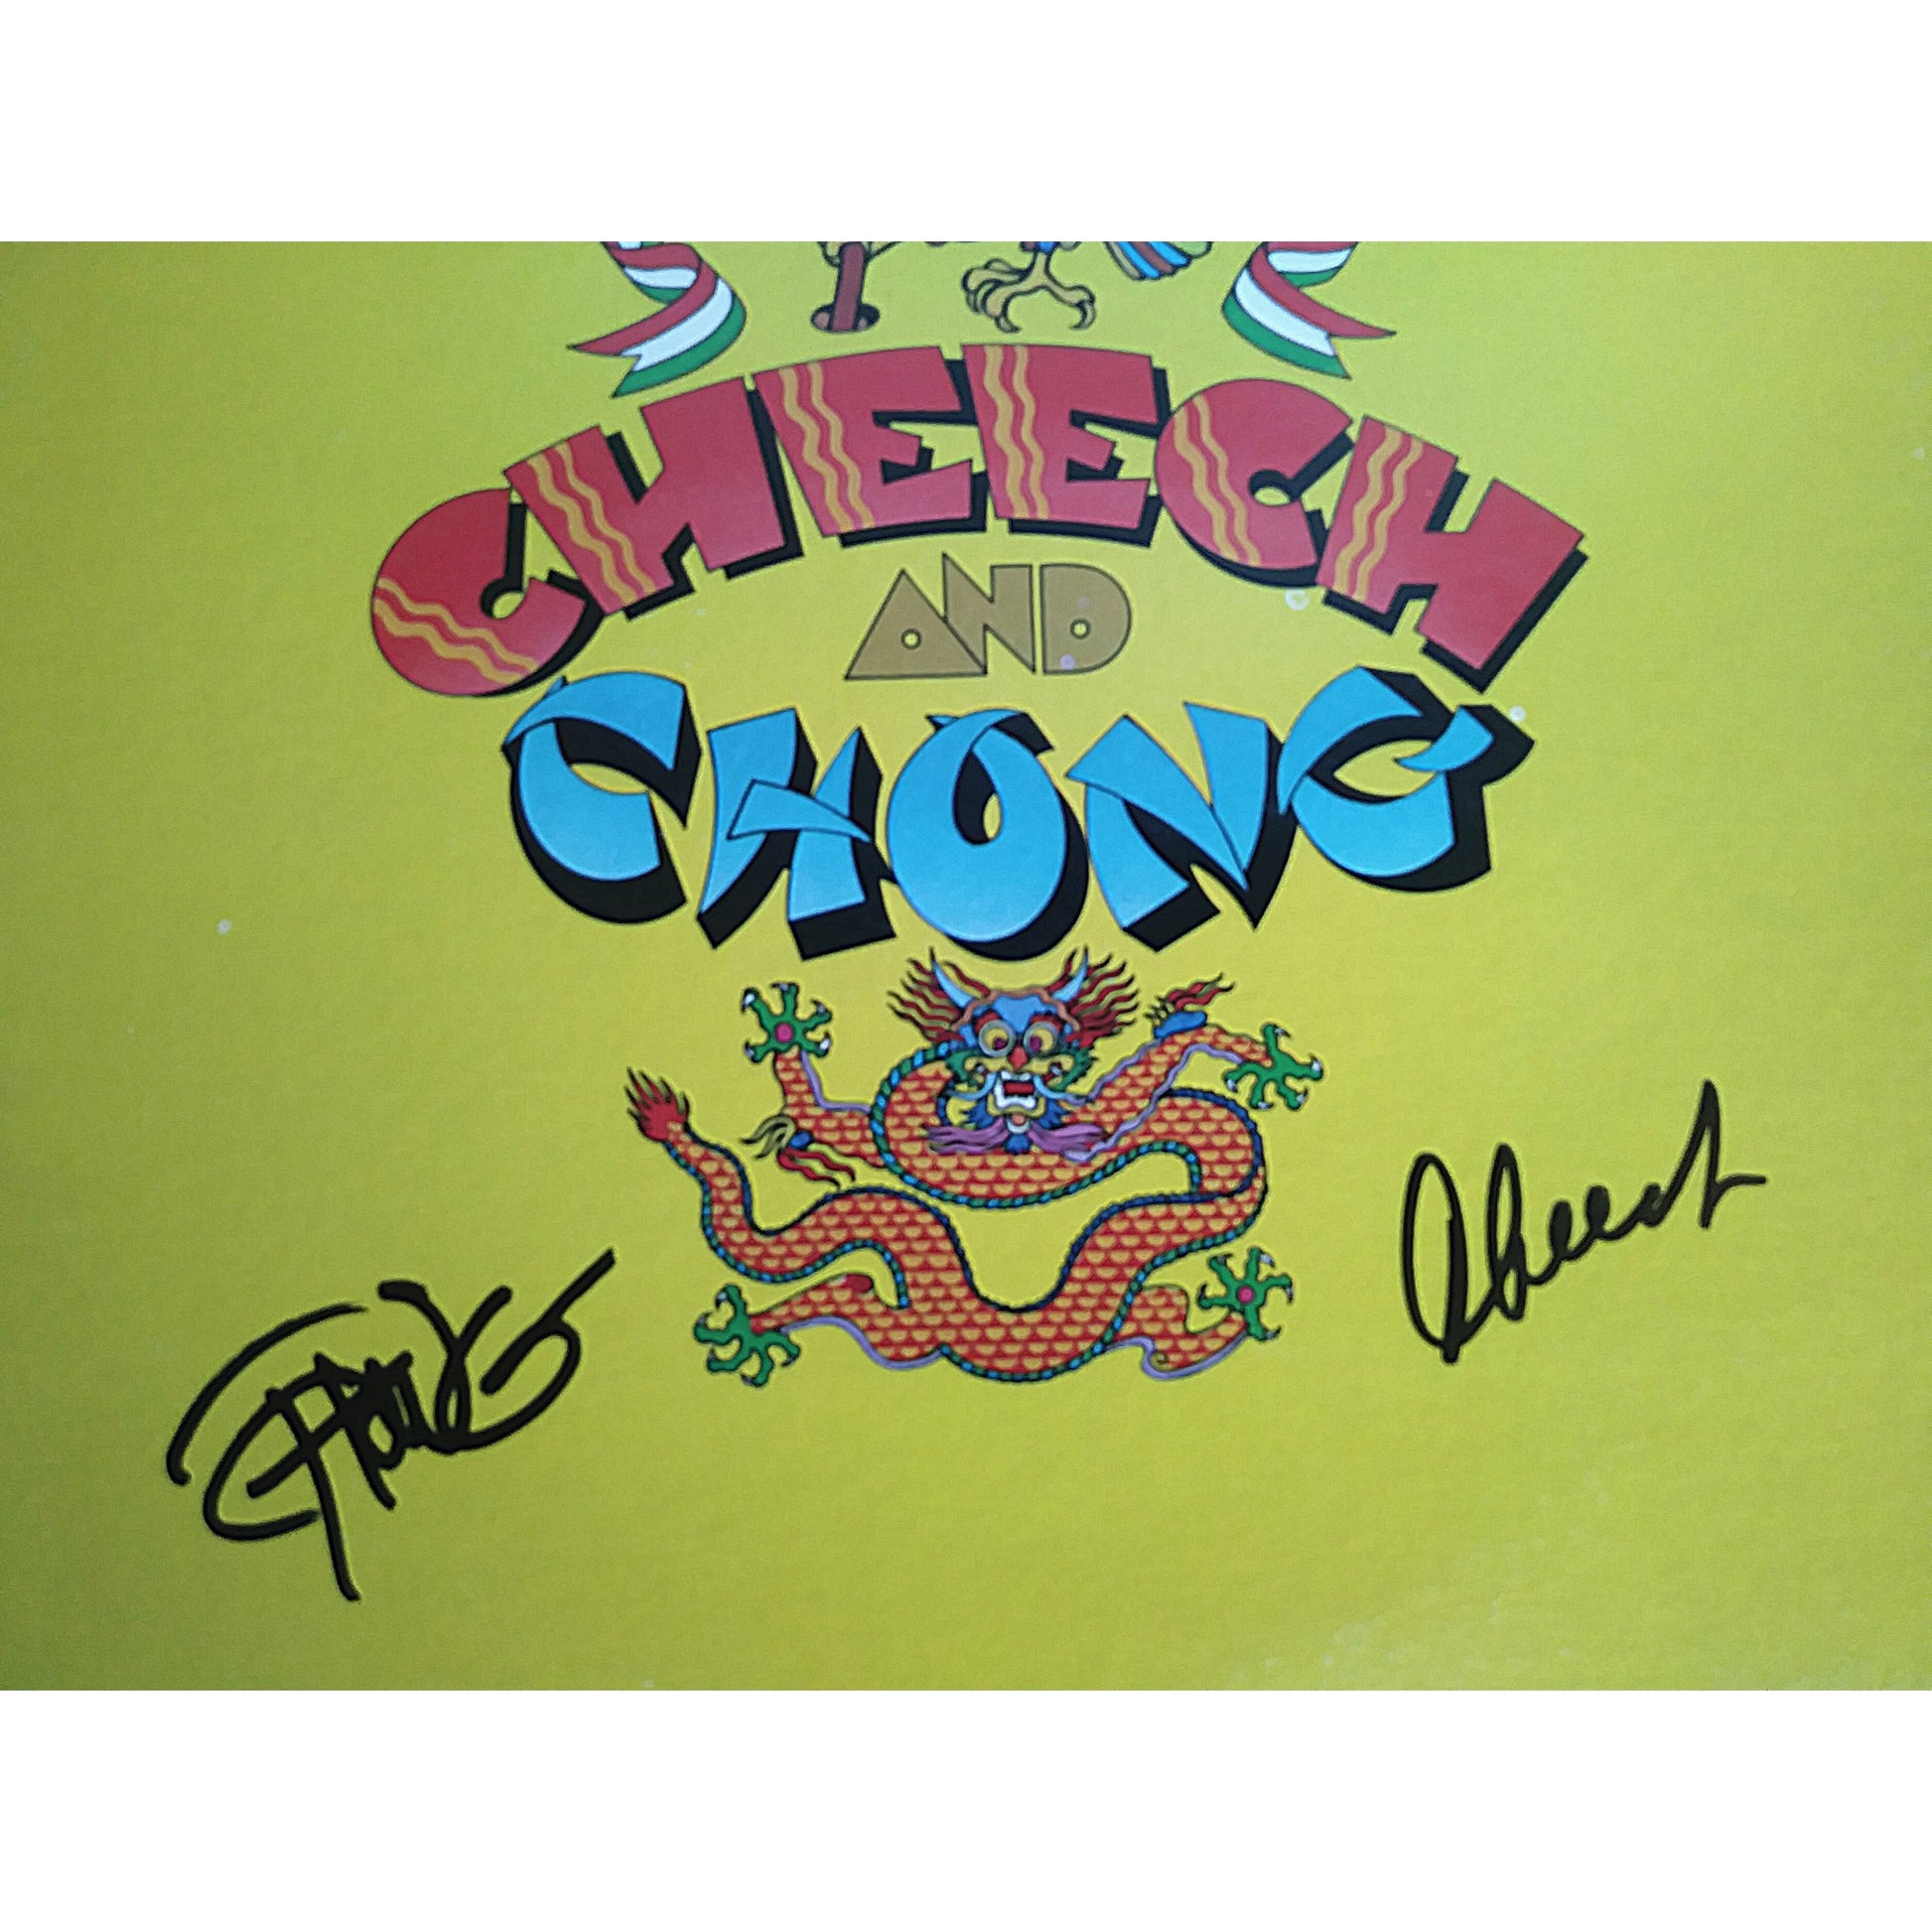 Music- Autographed- Cheech and Chong Signed Vinyl Record Album Cover Beckett BAS 102